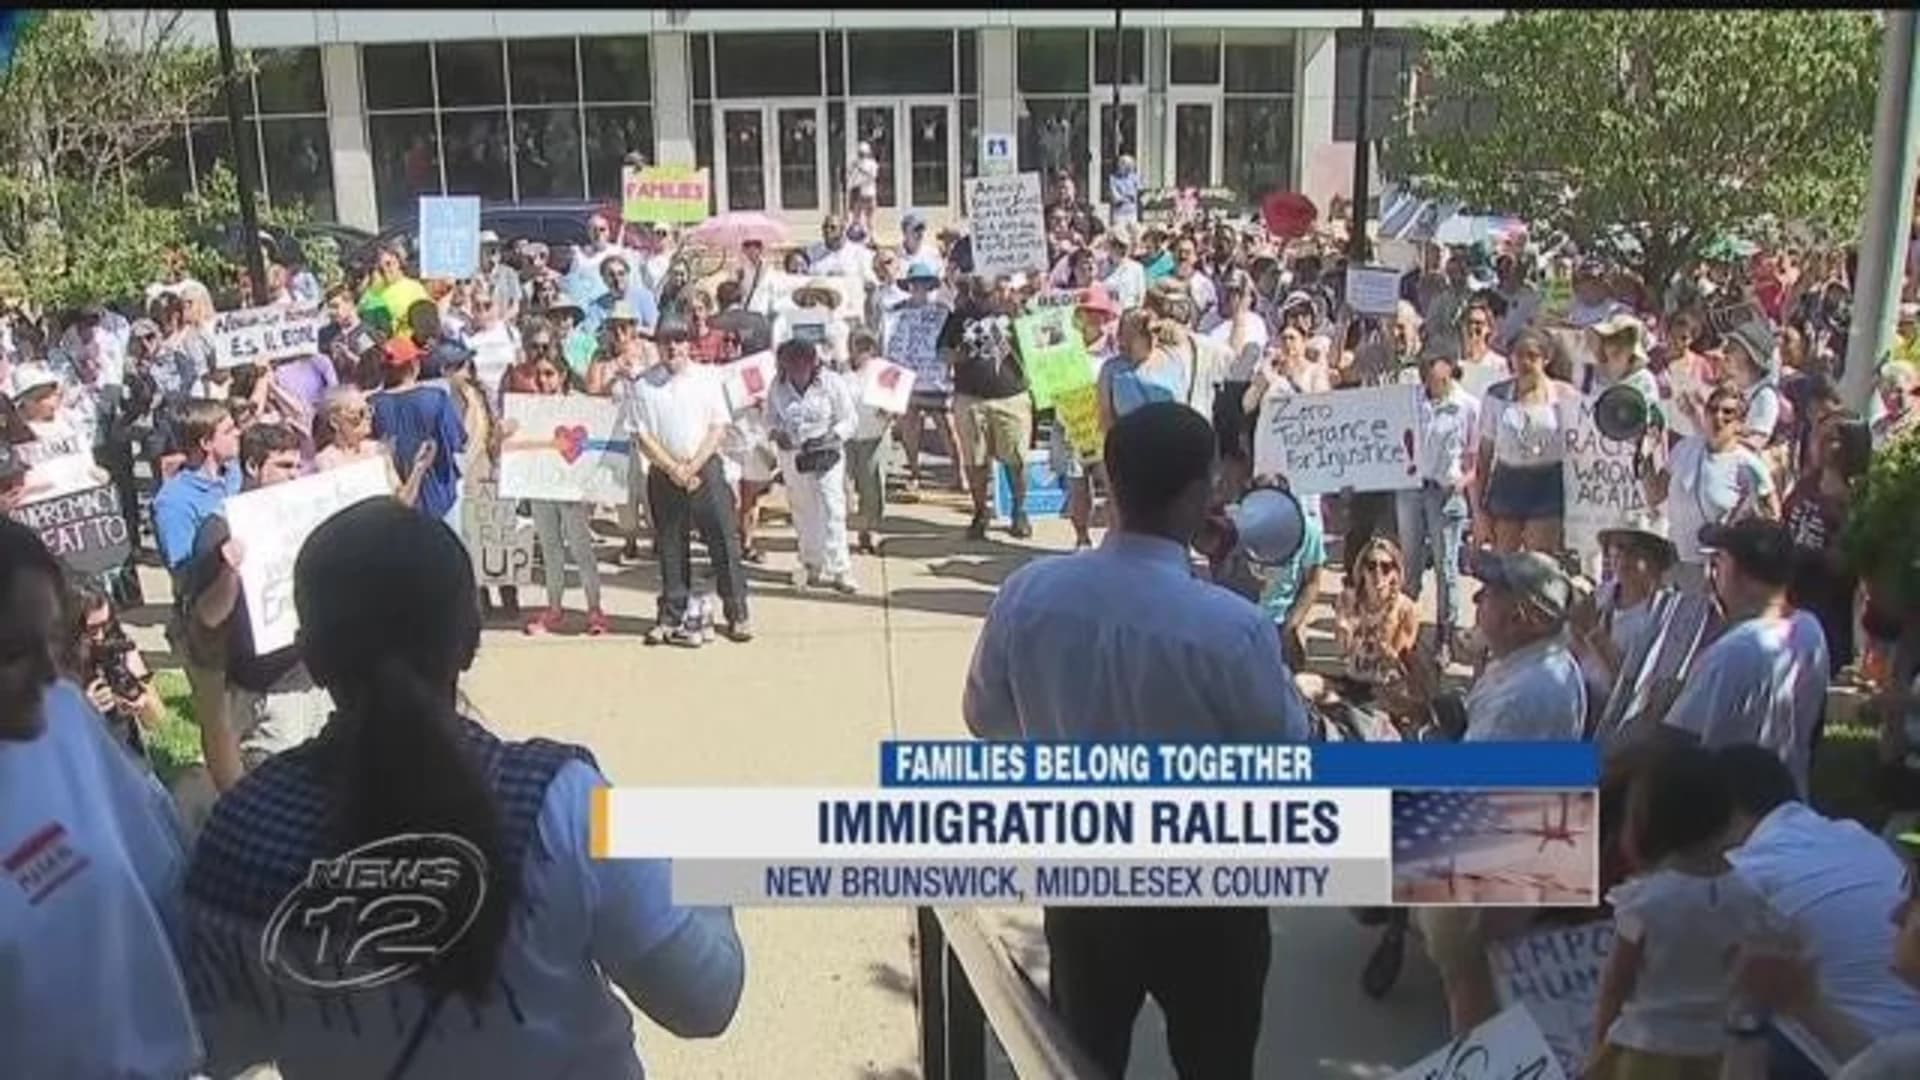 Crowds turn out for 'Families Belong Together' immigration rallies in NJ